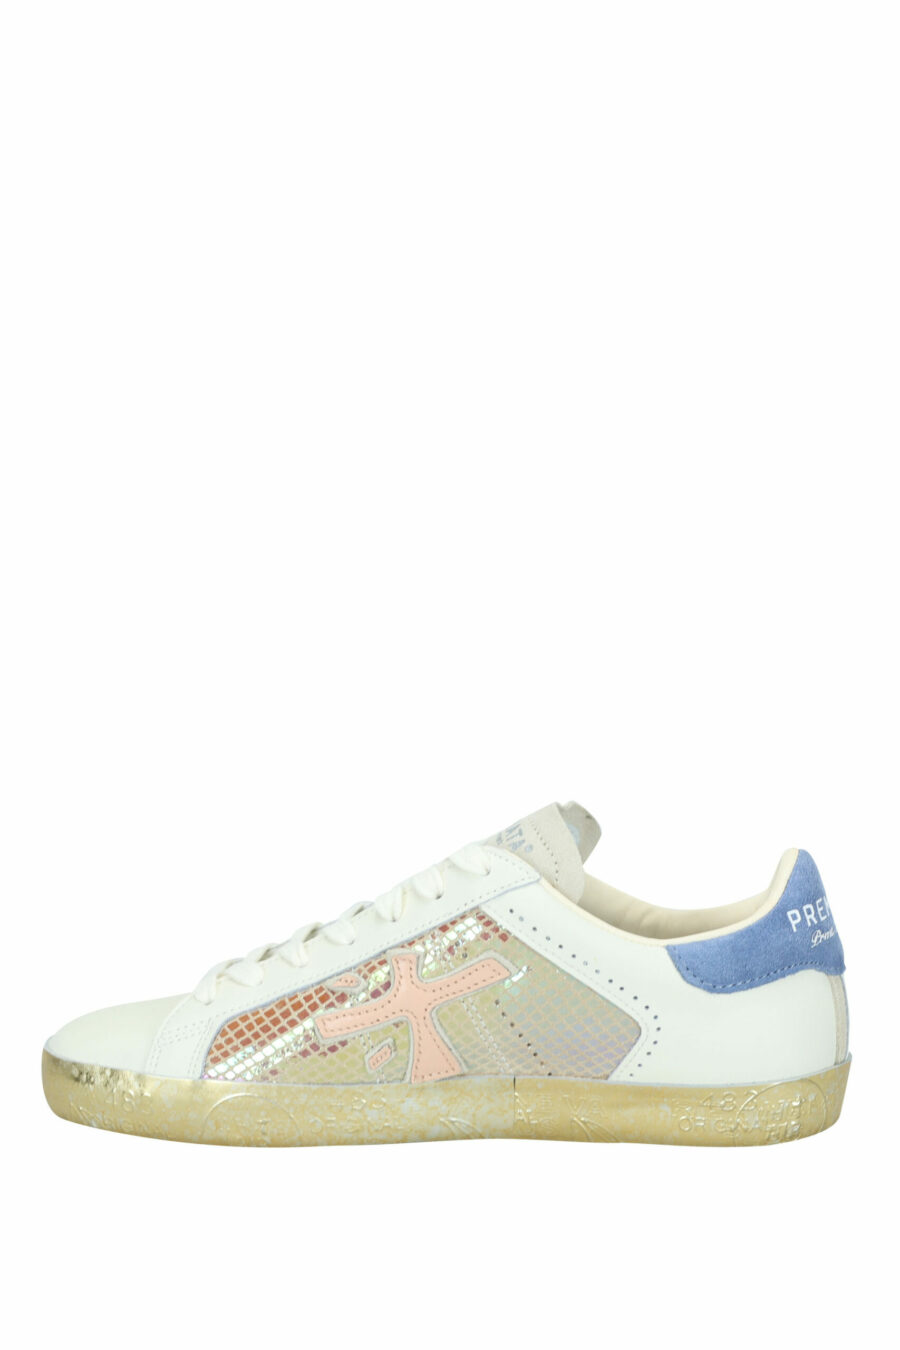 Multicoloured white trainers with gold sole "Stevend 6666" - 8053680396552 2 scaled